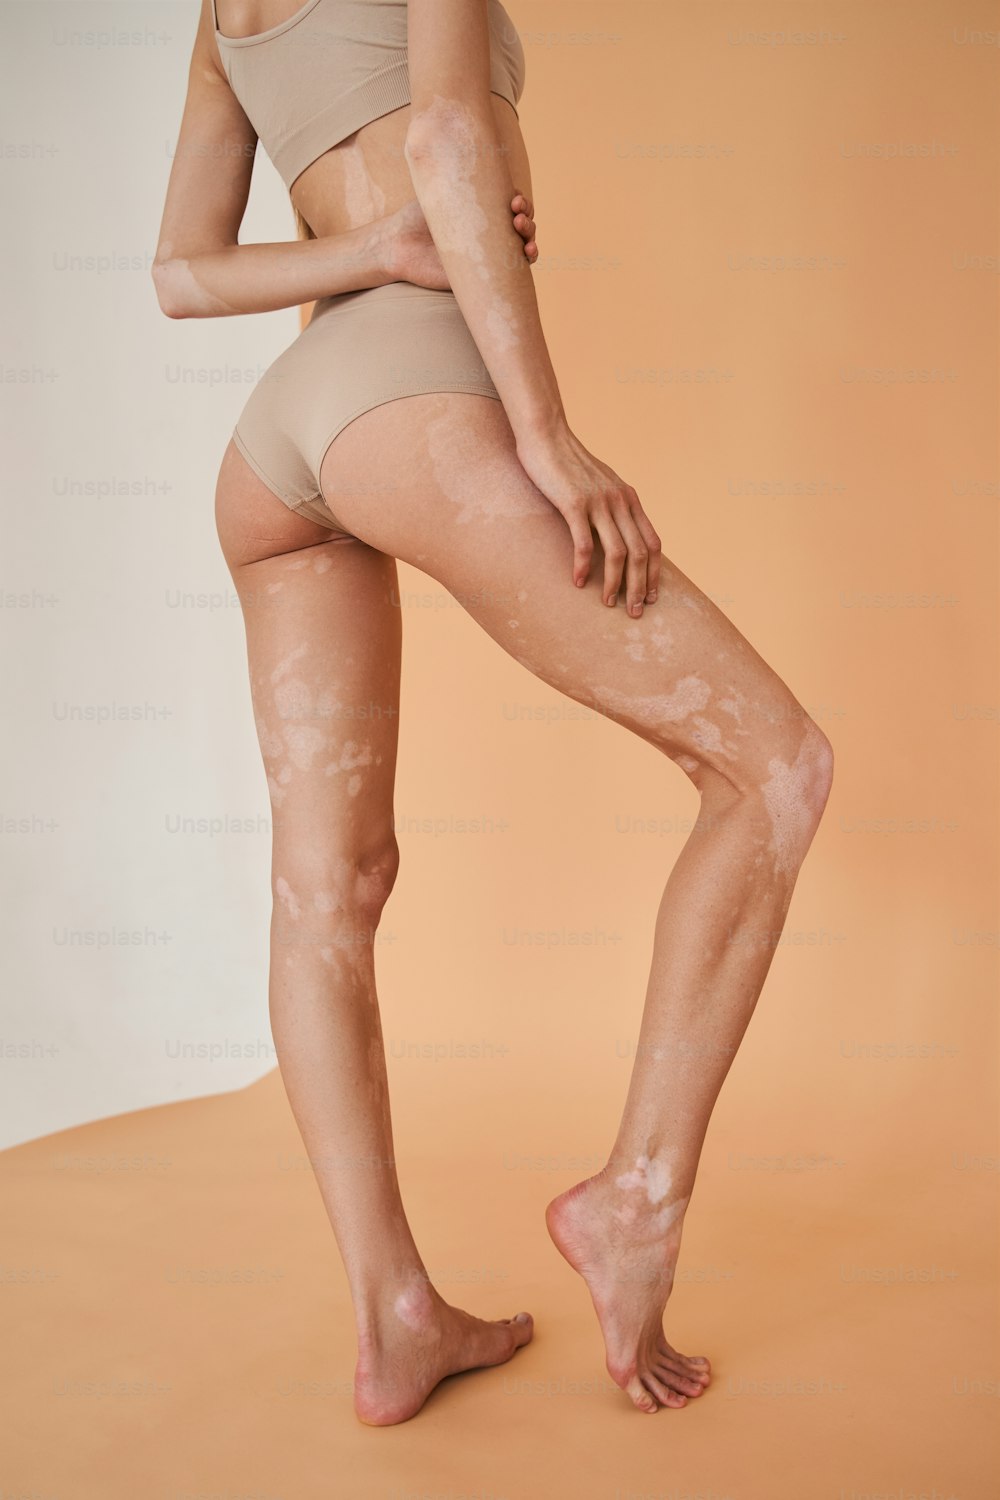 Cropped view of the young vitiligo skin woman is boasting of her figure while posing at the studio with beige background. Skin disorders and woman appearance concept